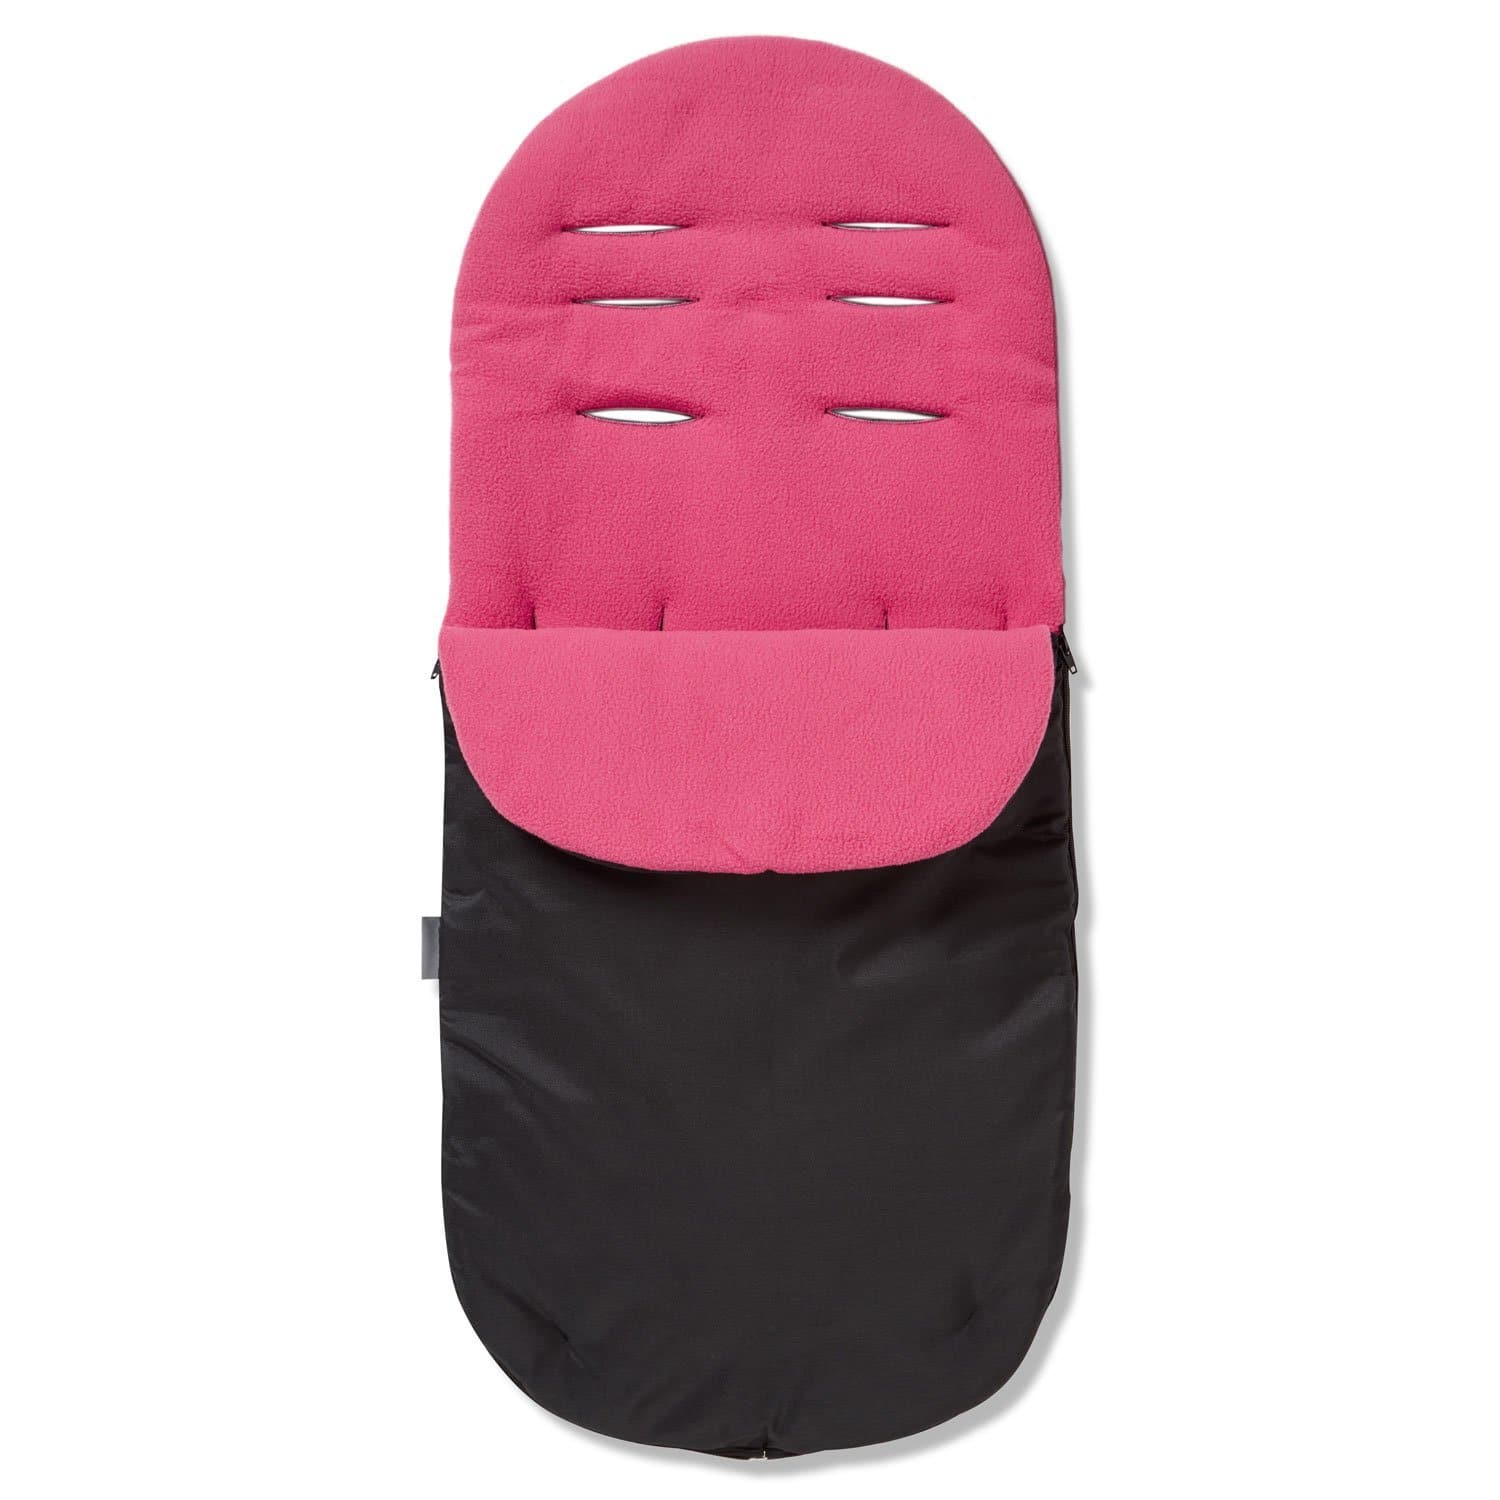 Footmuff / Cosy Toes Compatible with Hauck - Dark Pink / Fits All Models | For Your Little One